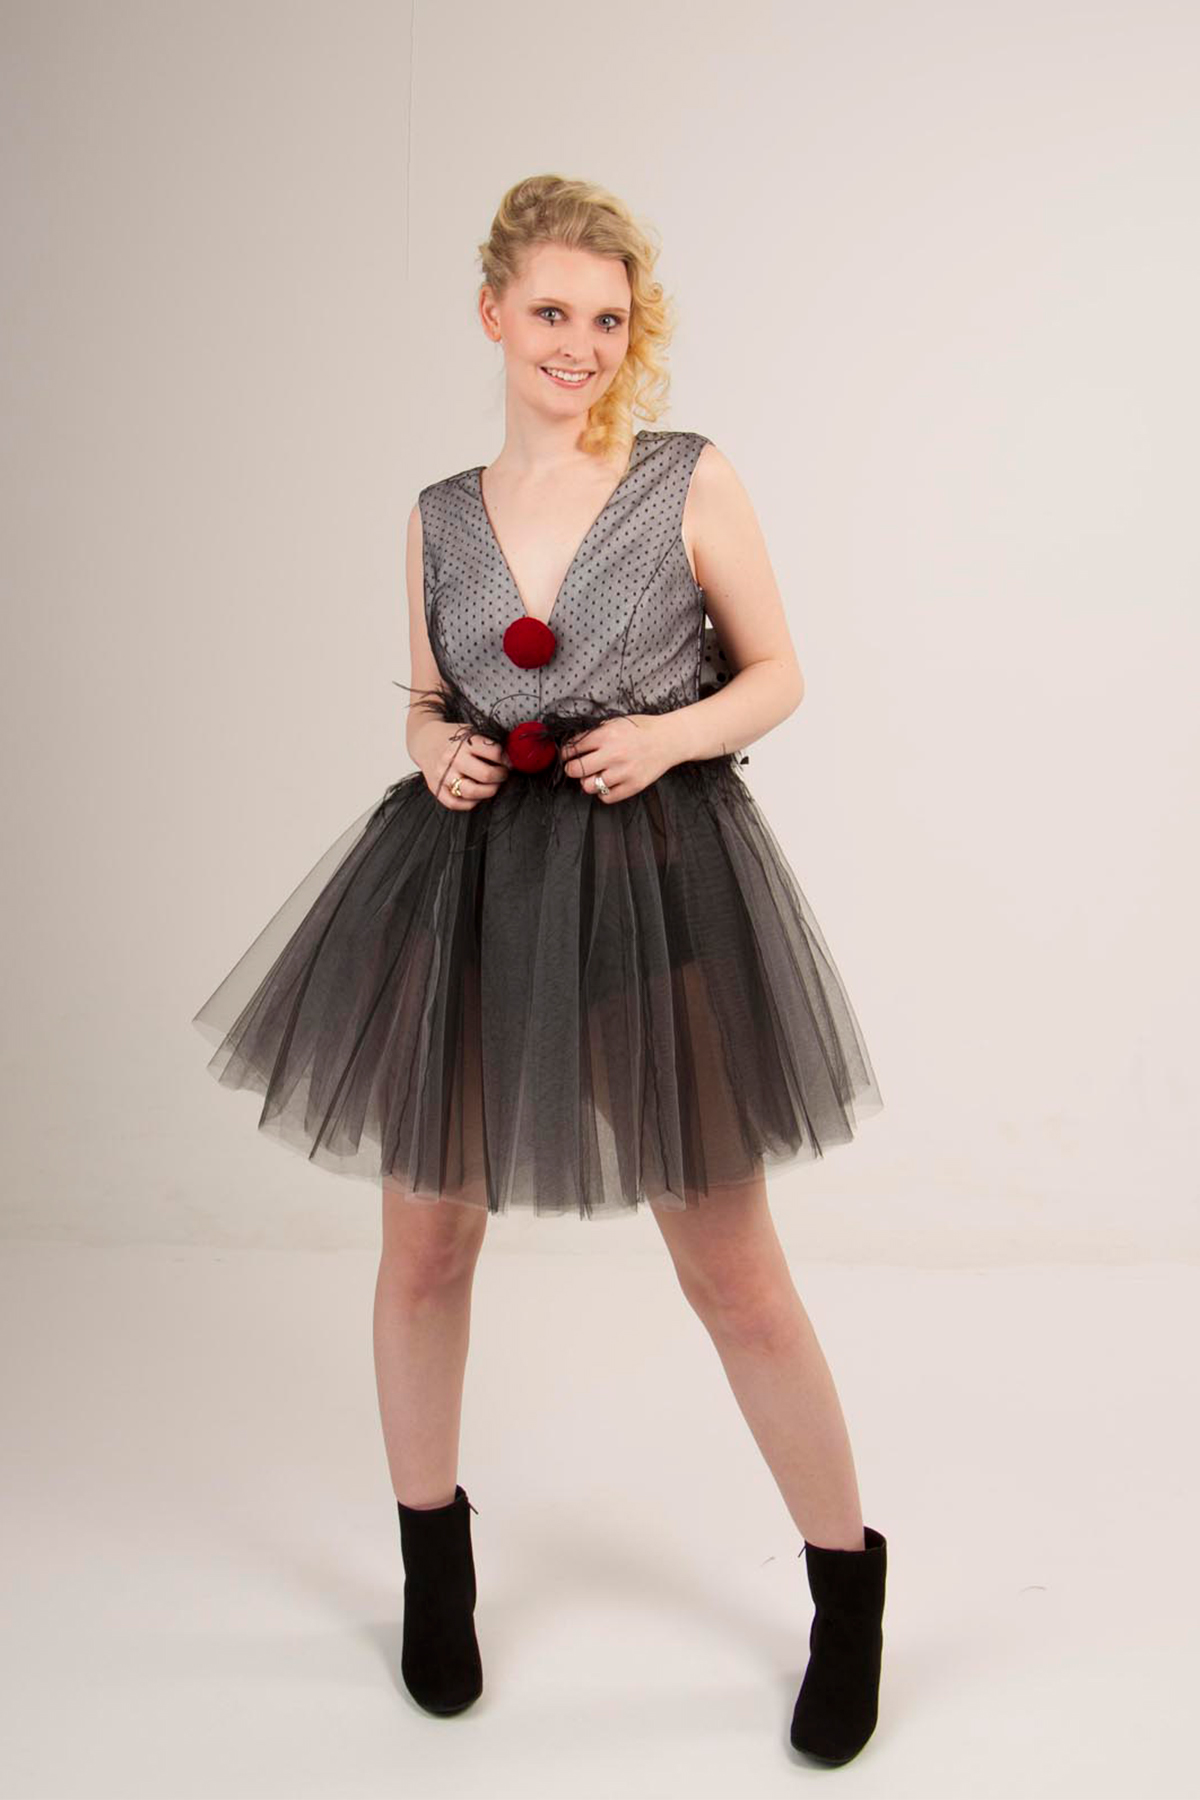 Dress bodice with polka dot overlay, full tulle skirt with an ostrich feather
                trim and pompoms.